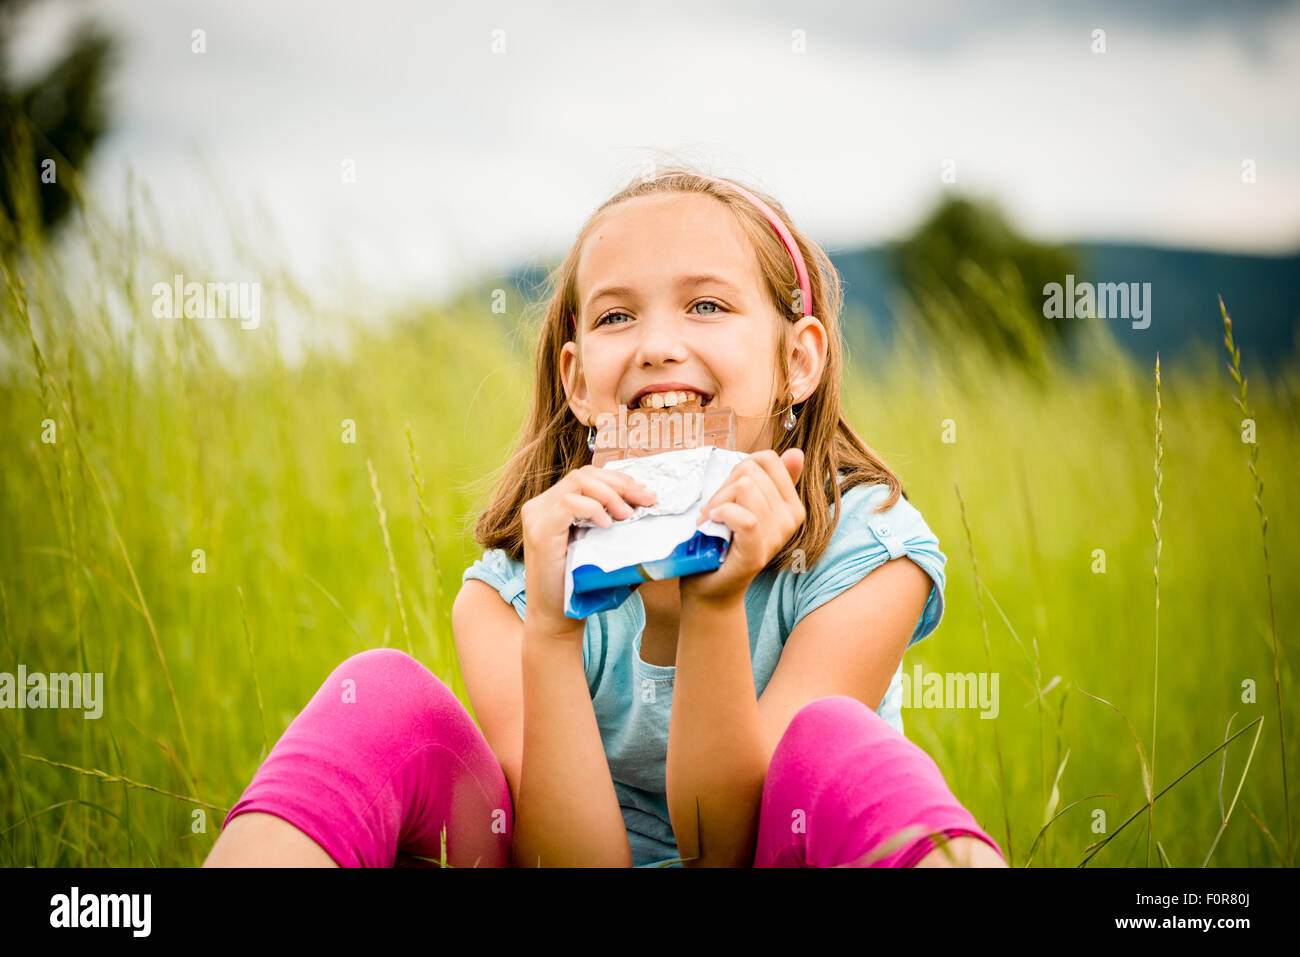 Child eating and relishing chocolate - outdoor in nature Stock Photo